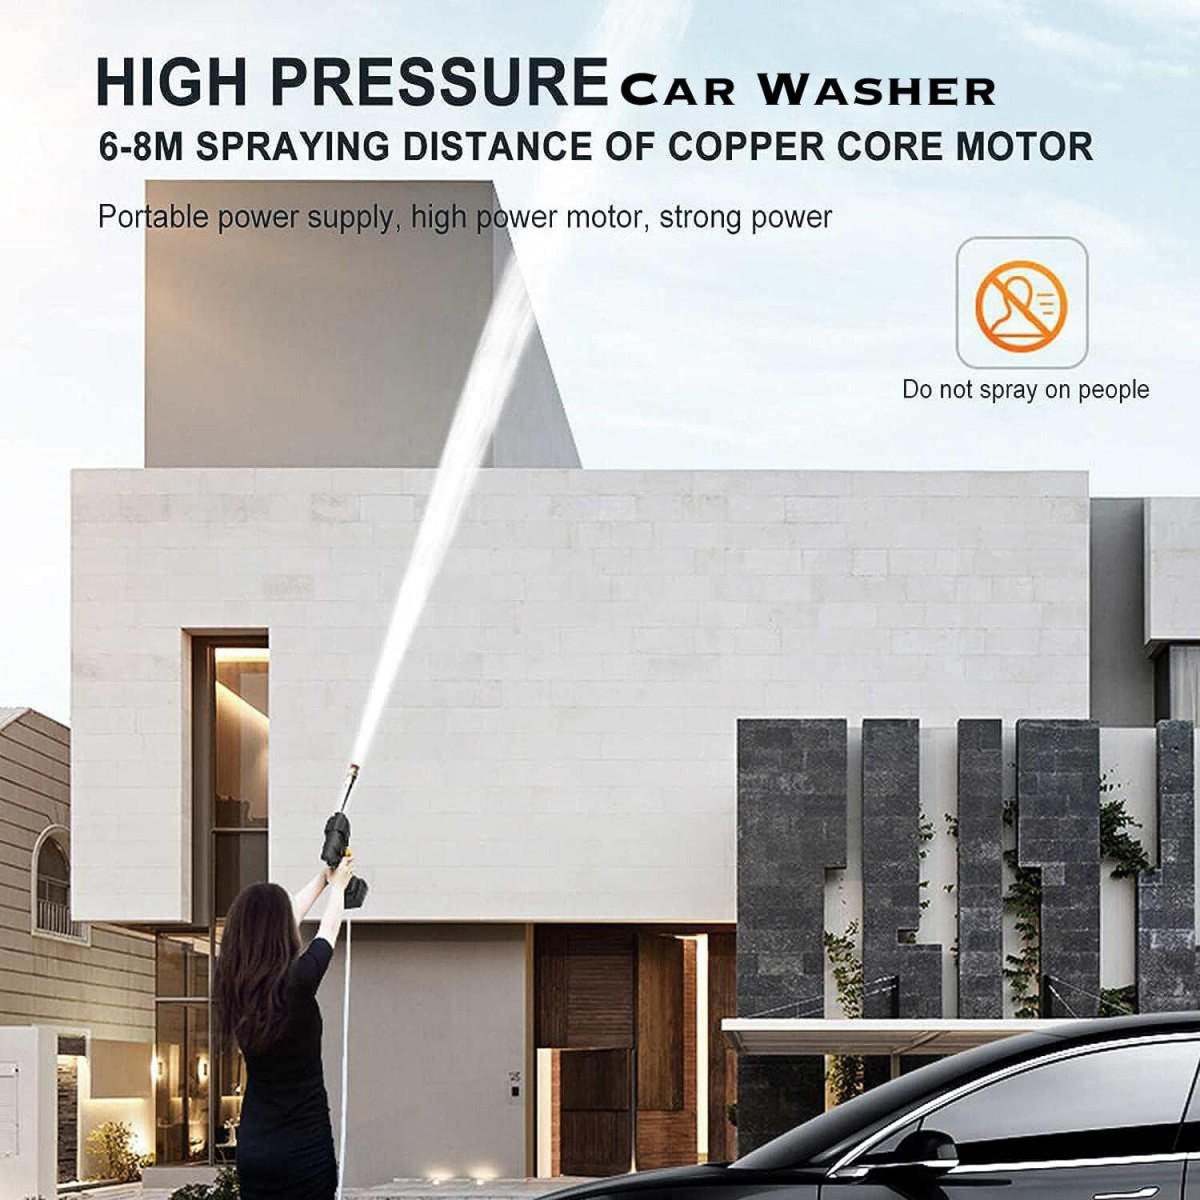 KRESHU Cordless 48V Electric High Pressure Car Washer Machine Accessories Portable Power ABS Material Multi-Function 3 in 1 Nozzle 5M Pipe for Washing CarsWatering FlowersCleaning Floors 1-pcs